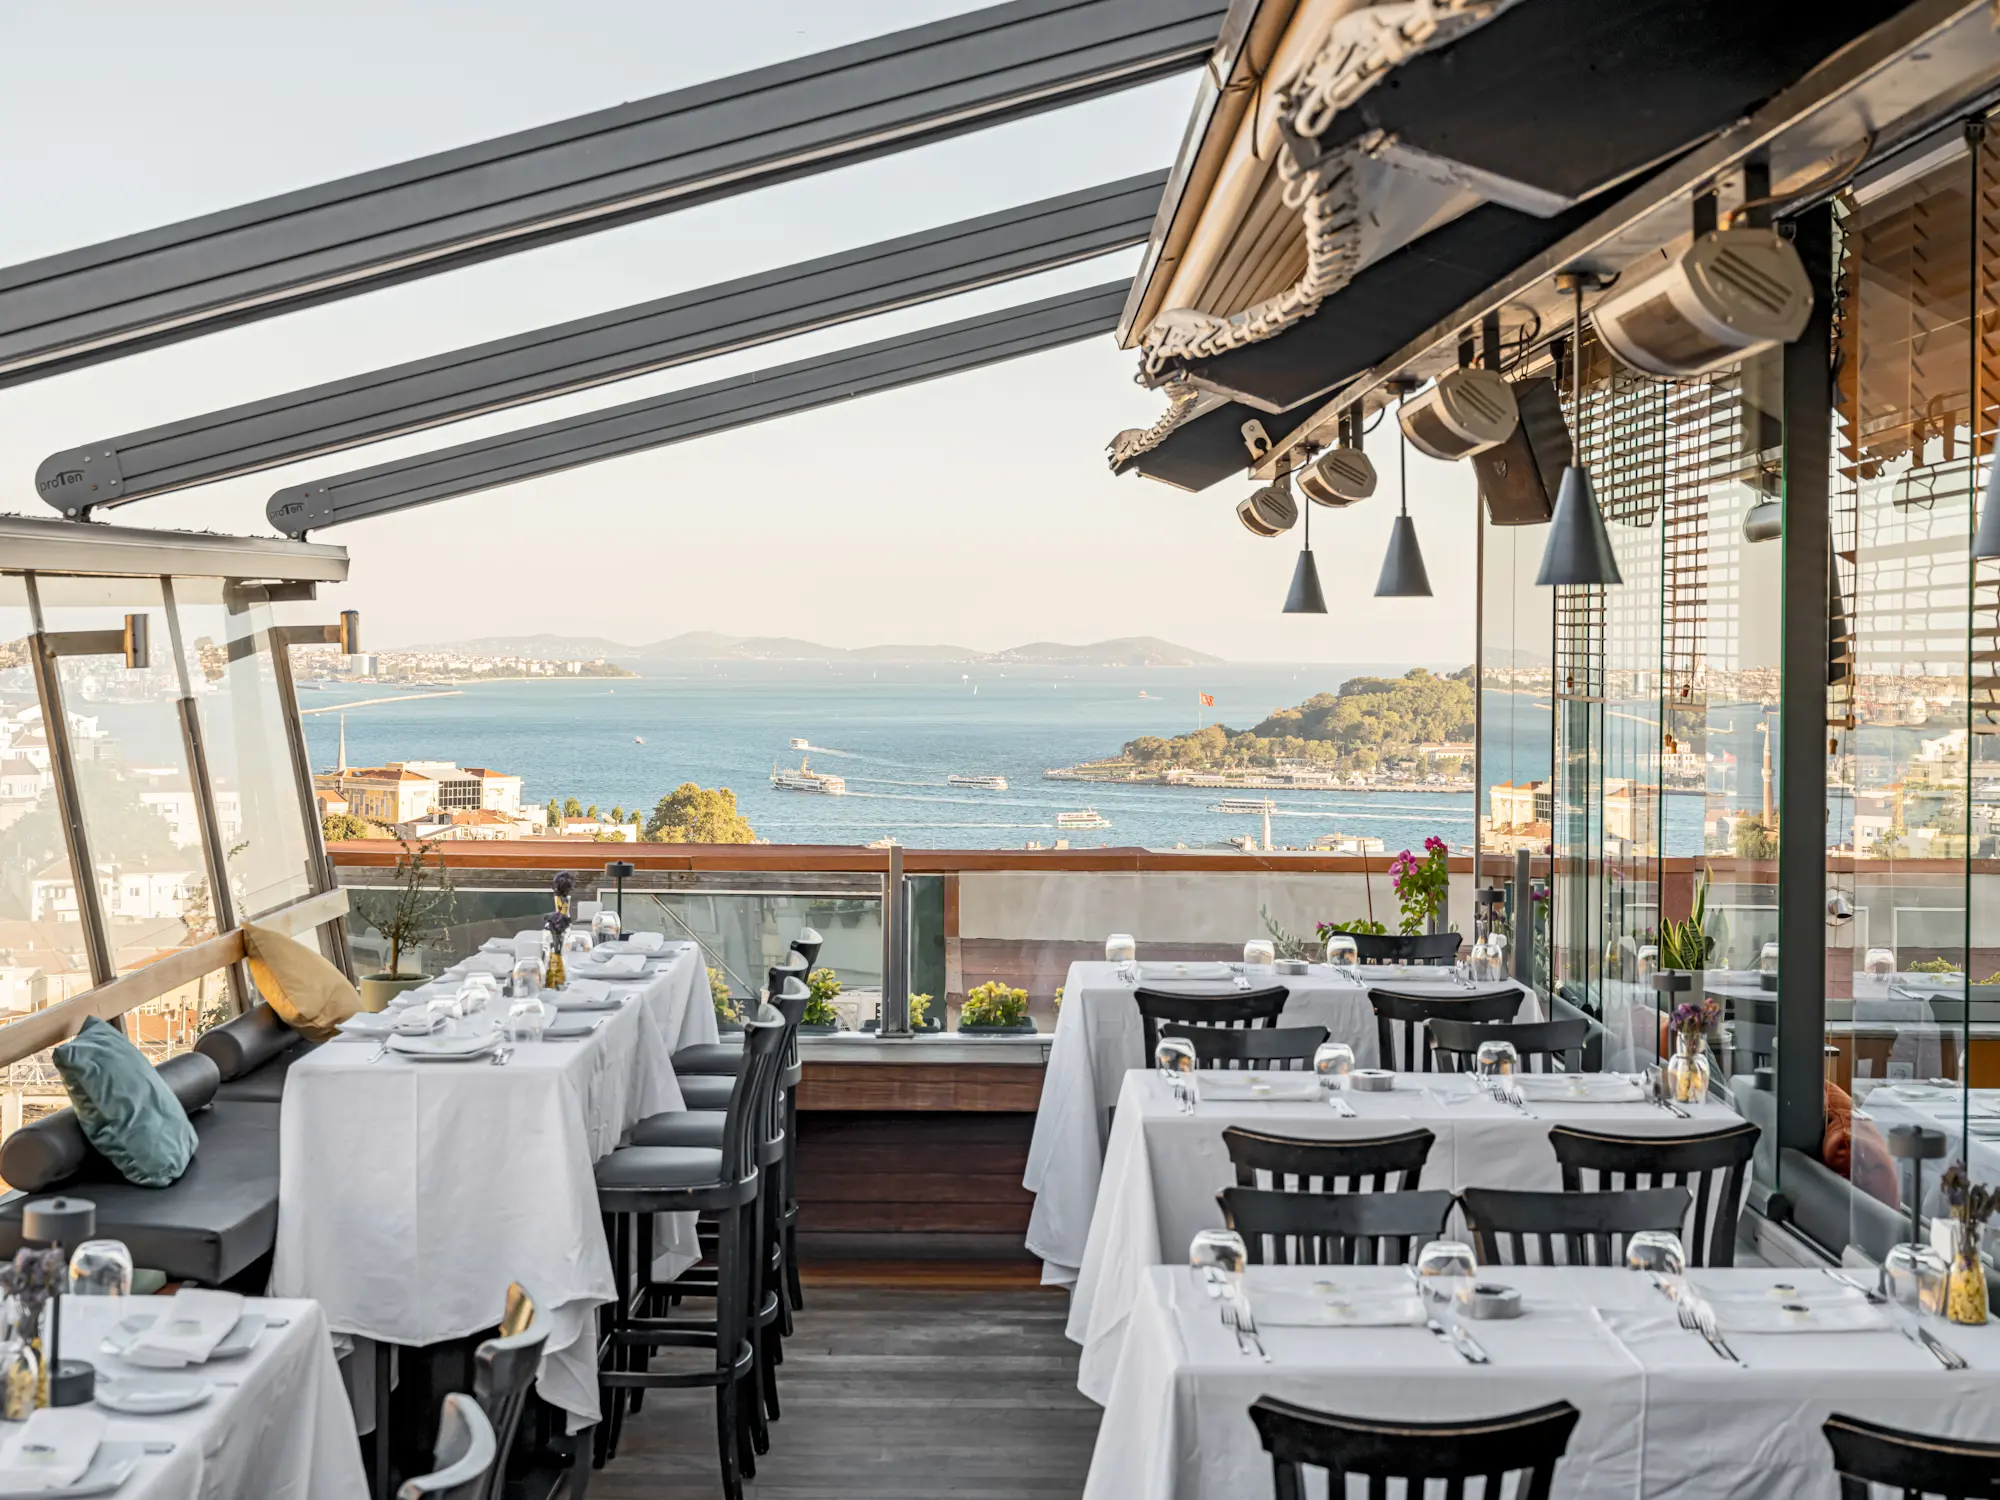 The perfect harmony of flavour and view meets at Litera.